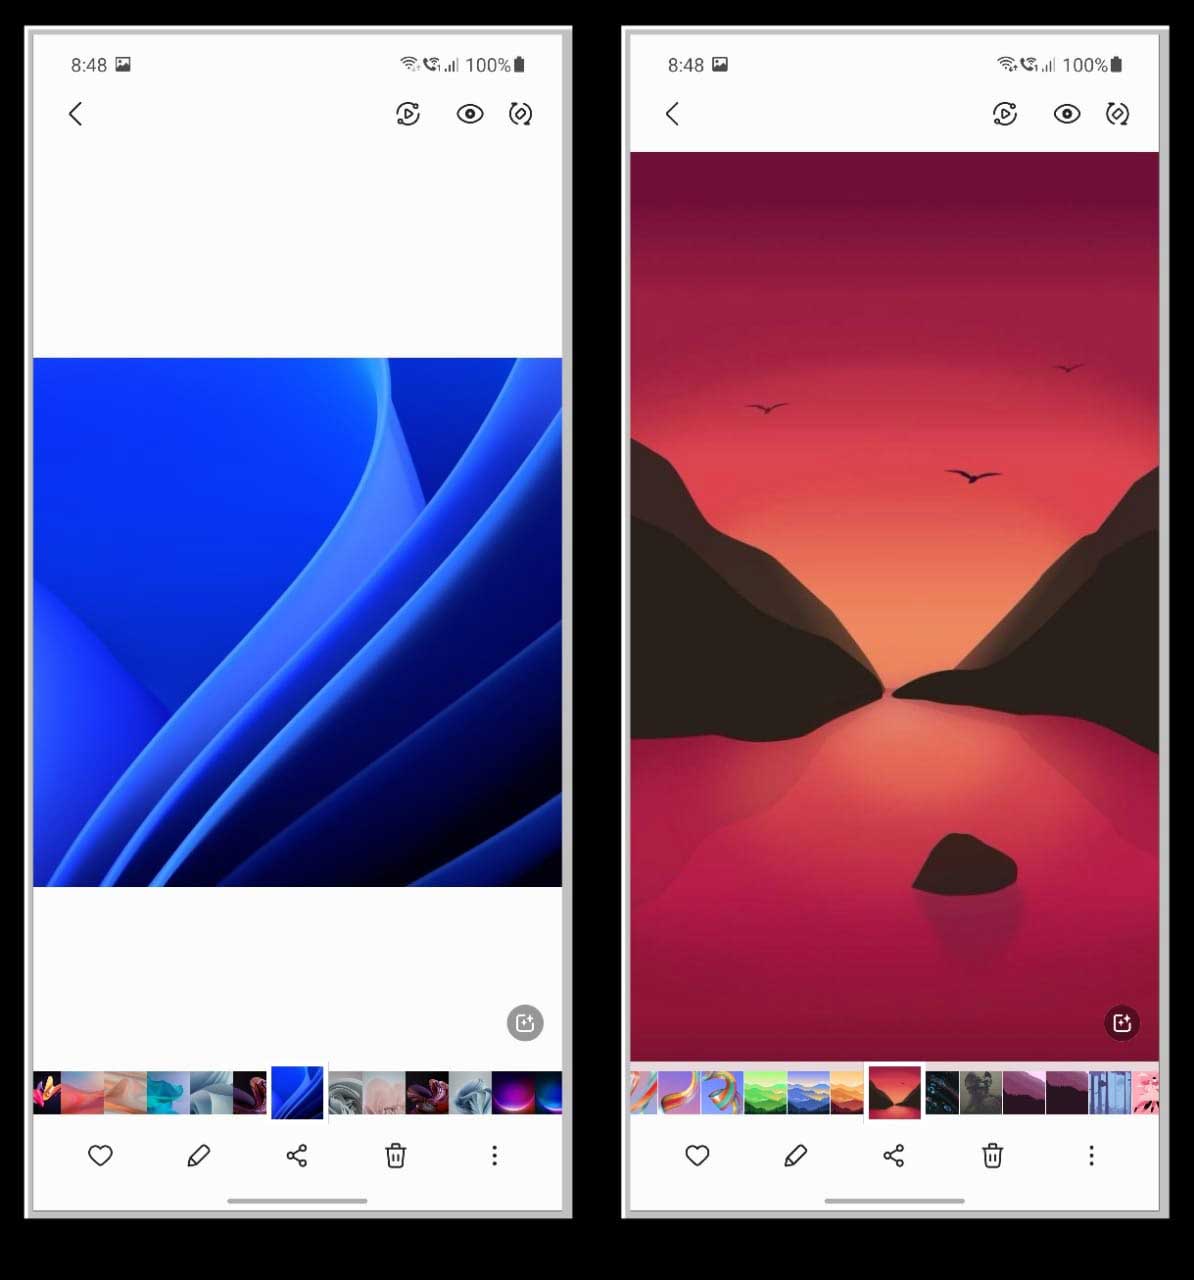 Samsung Gallery Remaster Pictures Feature: All You Need To Know